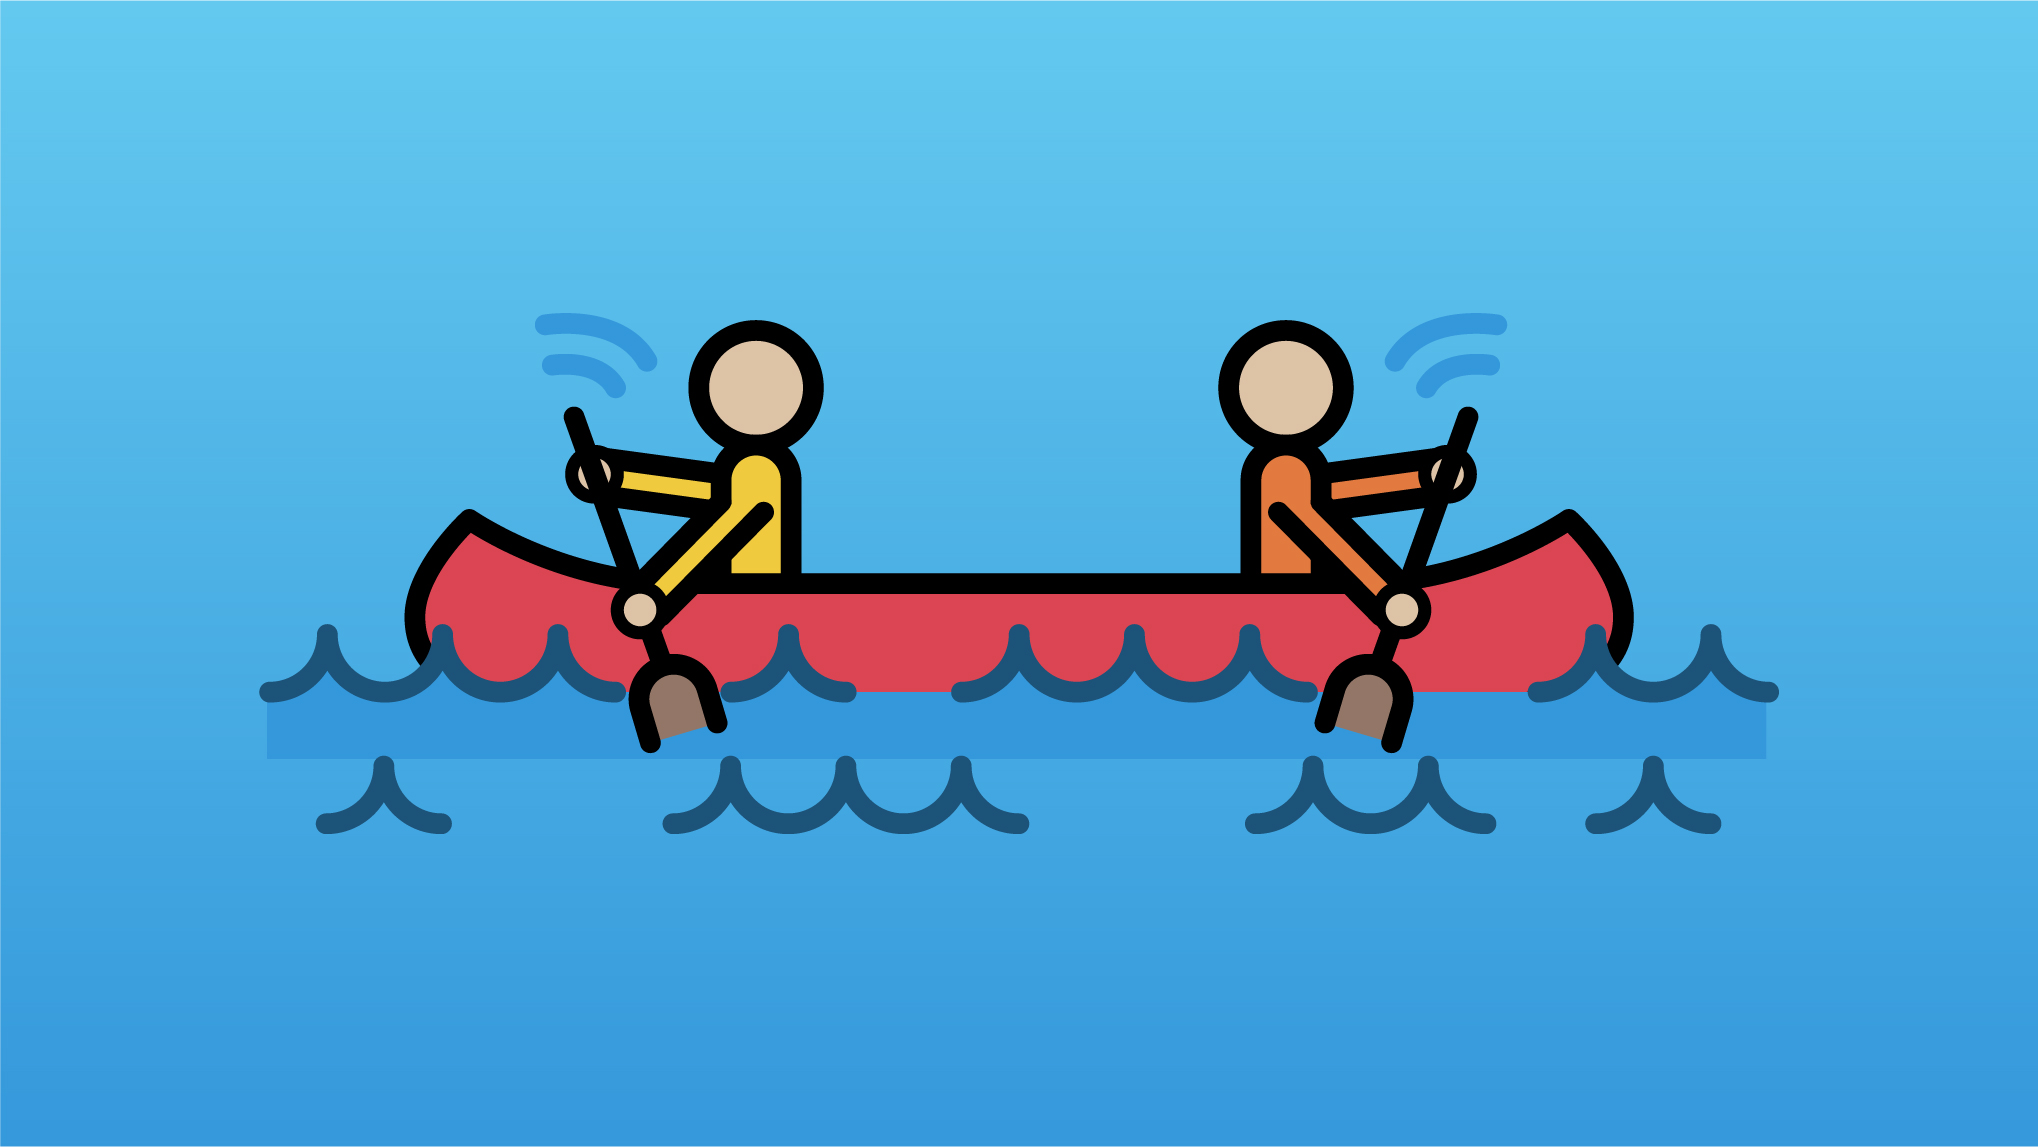 Two people paddling a canoe in opposite directions